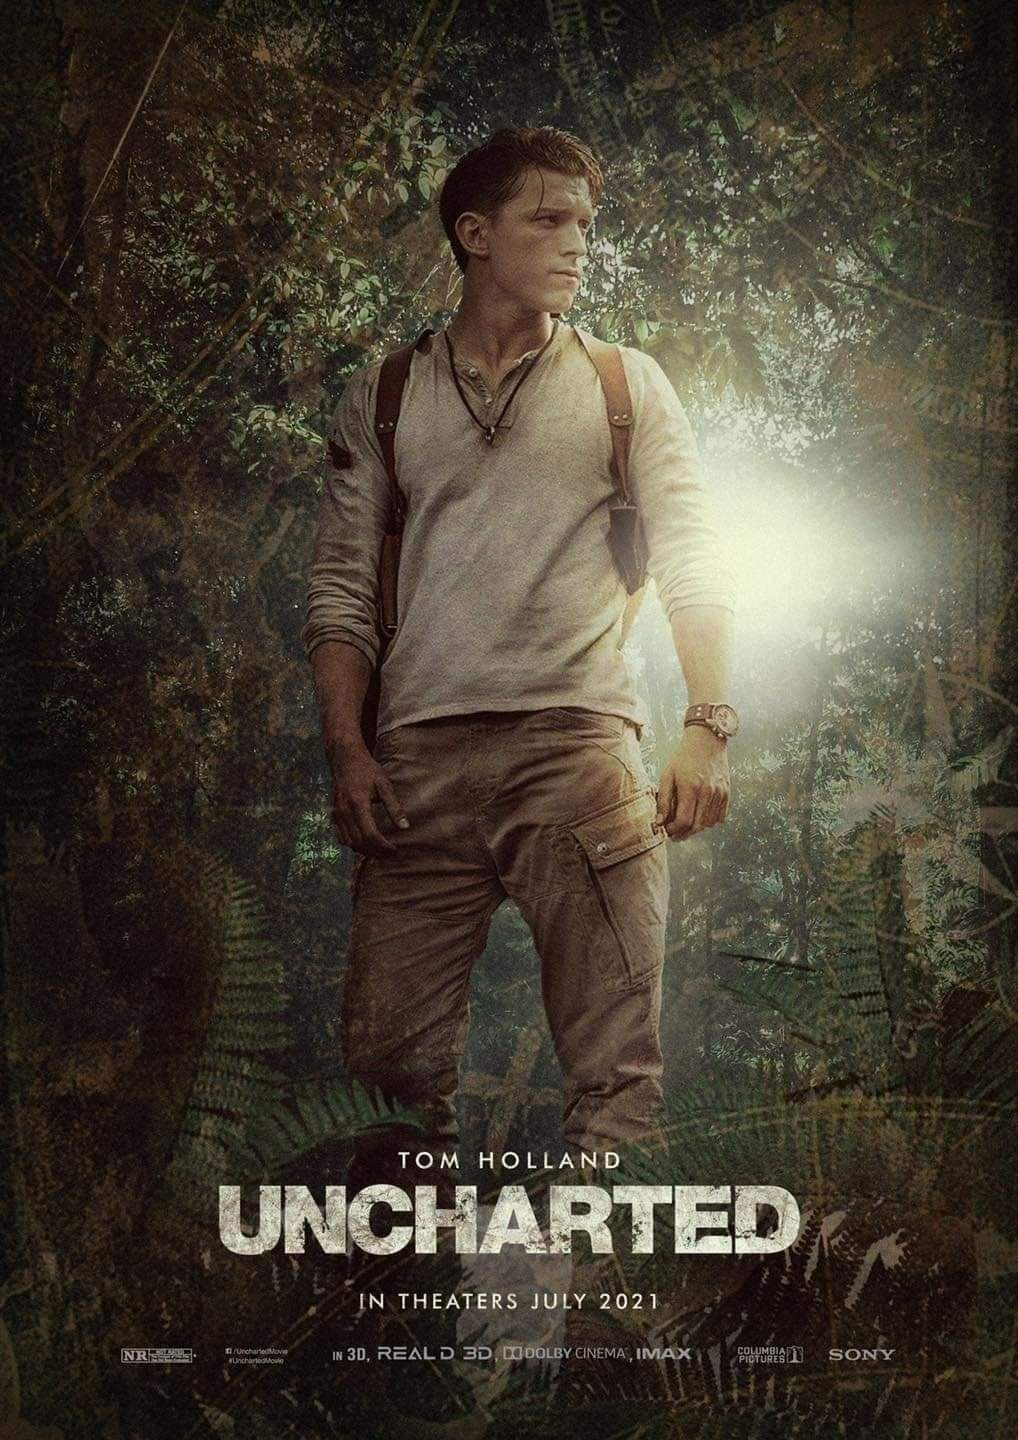 anticipated movies 2021 - uncharted film - Tom Holland Uncharted In Theaters Nr. uncha Uncharte In 3D, Reald 3D, Di Dolby Cinema, Imax Count Sony